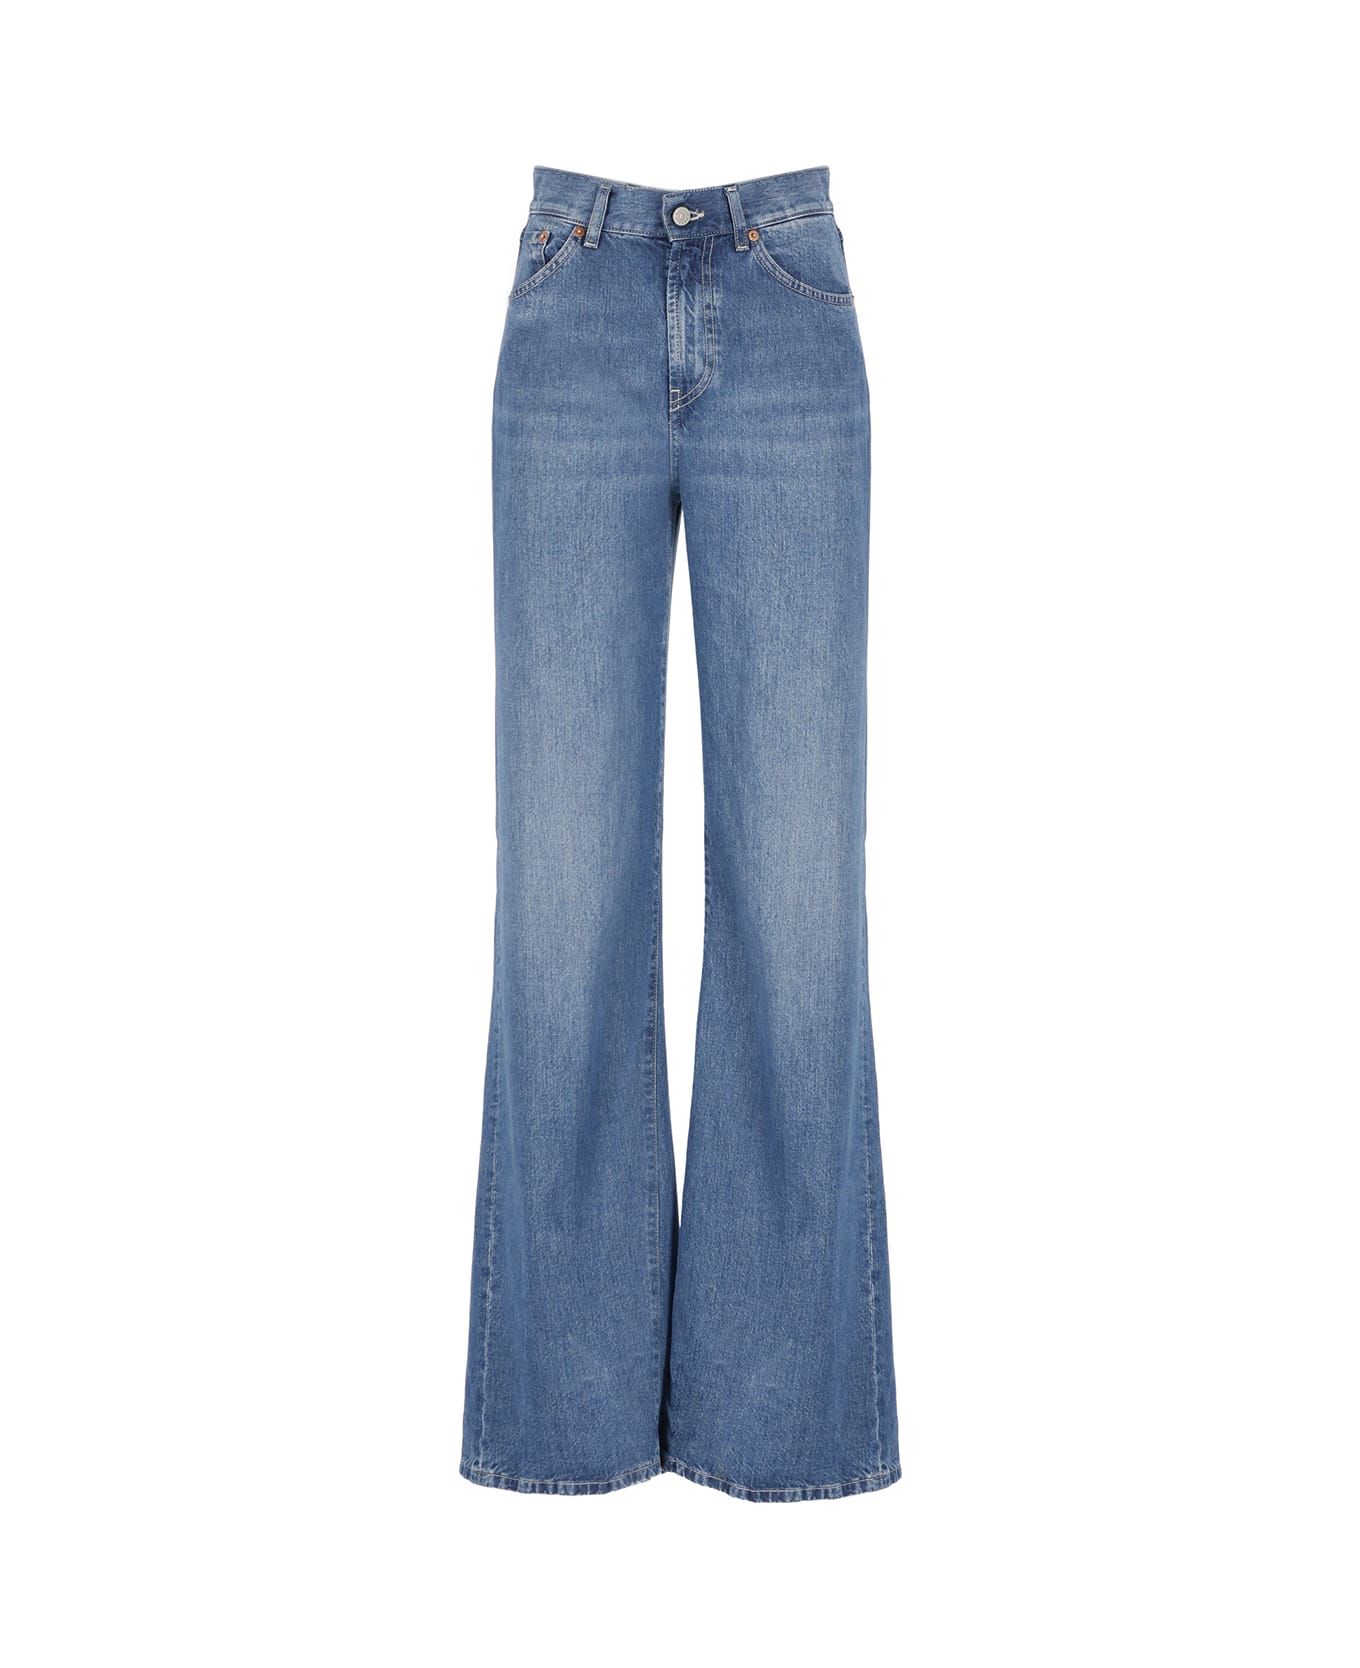 Dondup Blue Flared Jeans - Blue ボトムス